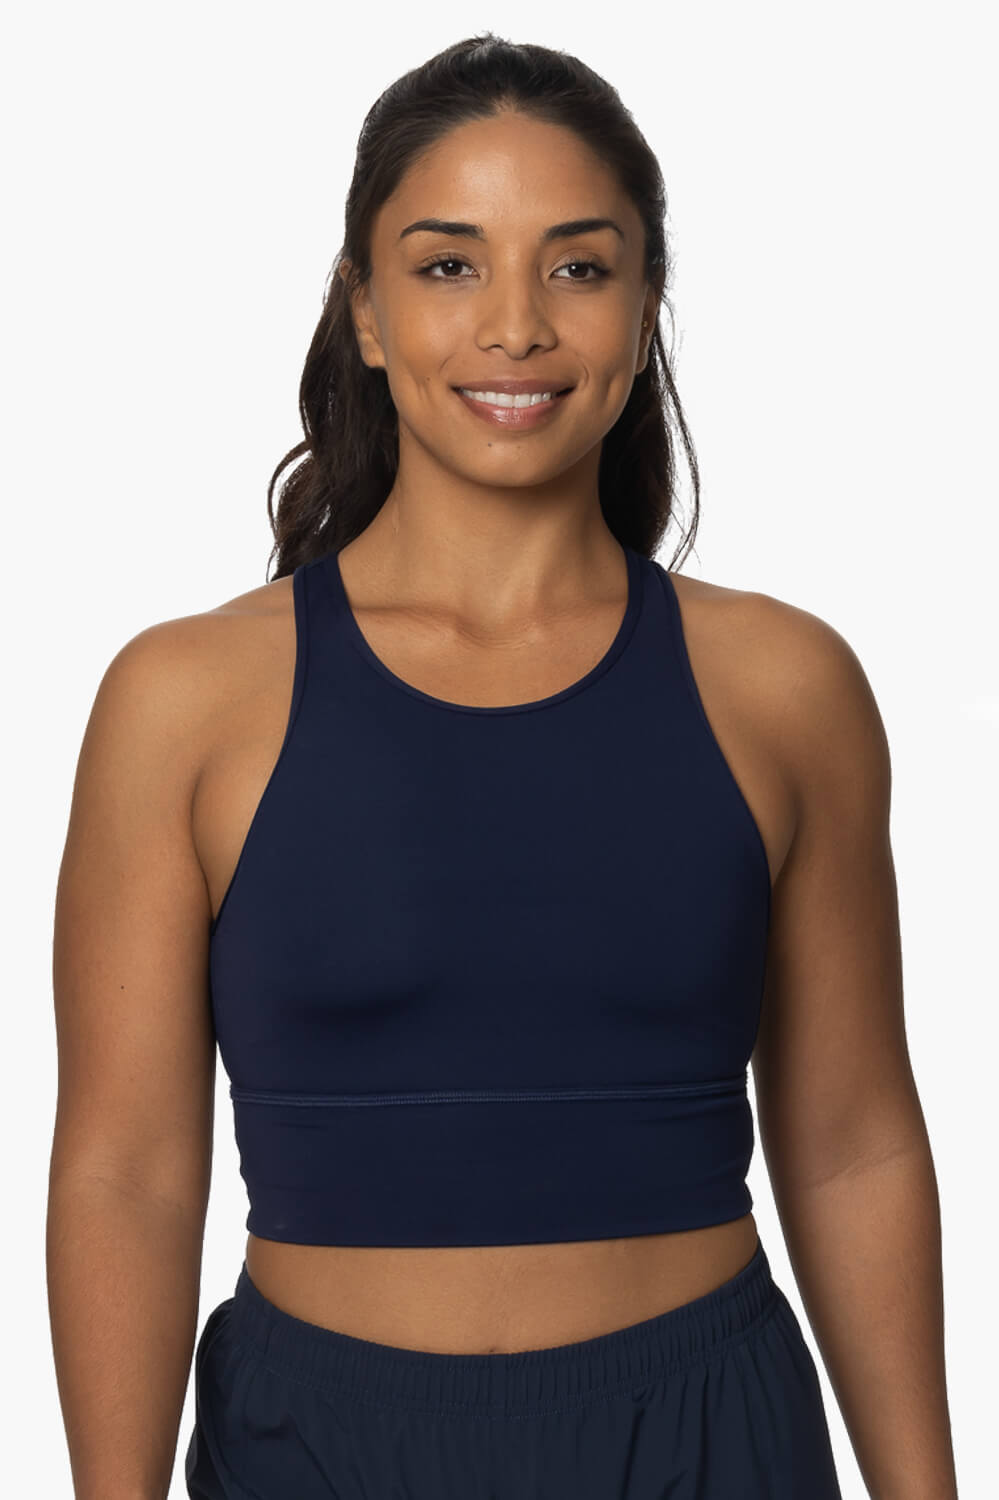 Swipe for fit pics —>] Low Support Bras Now Live! Excited to